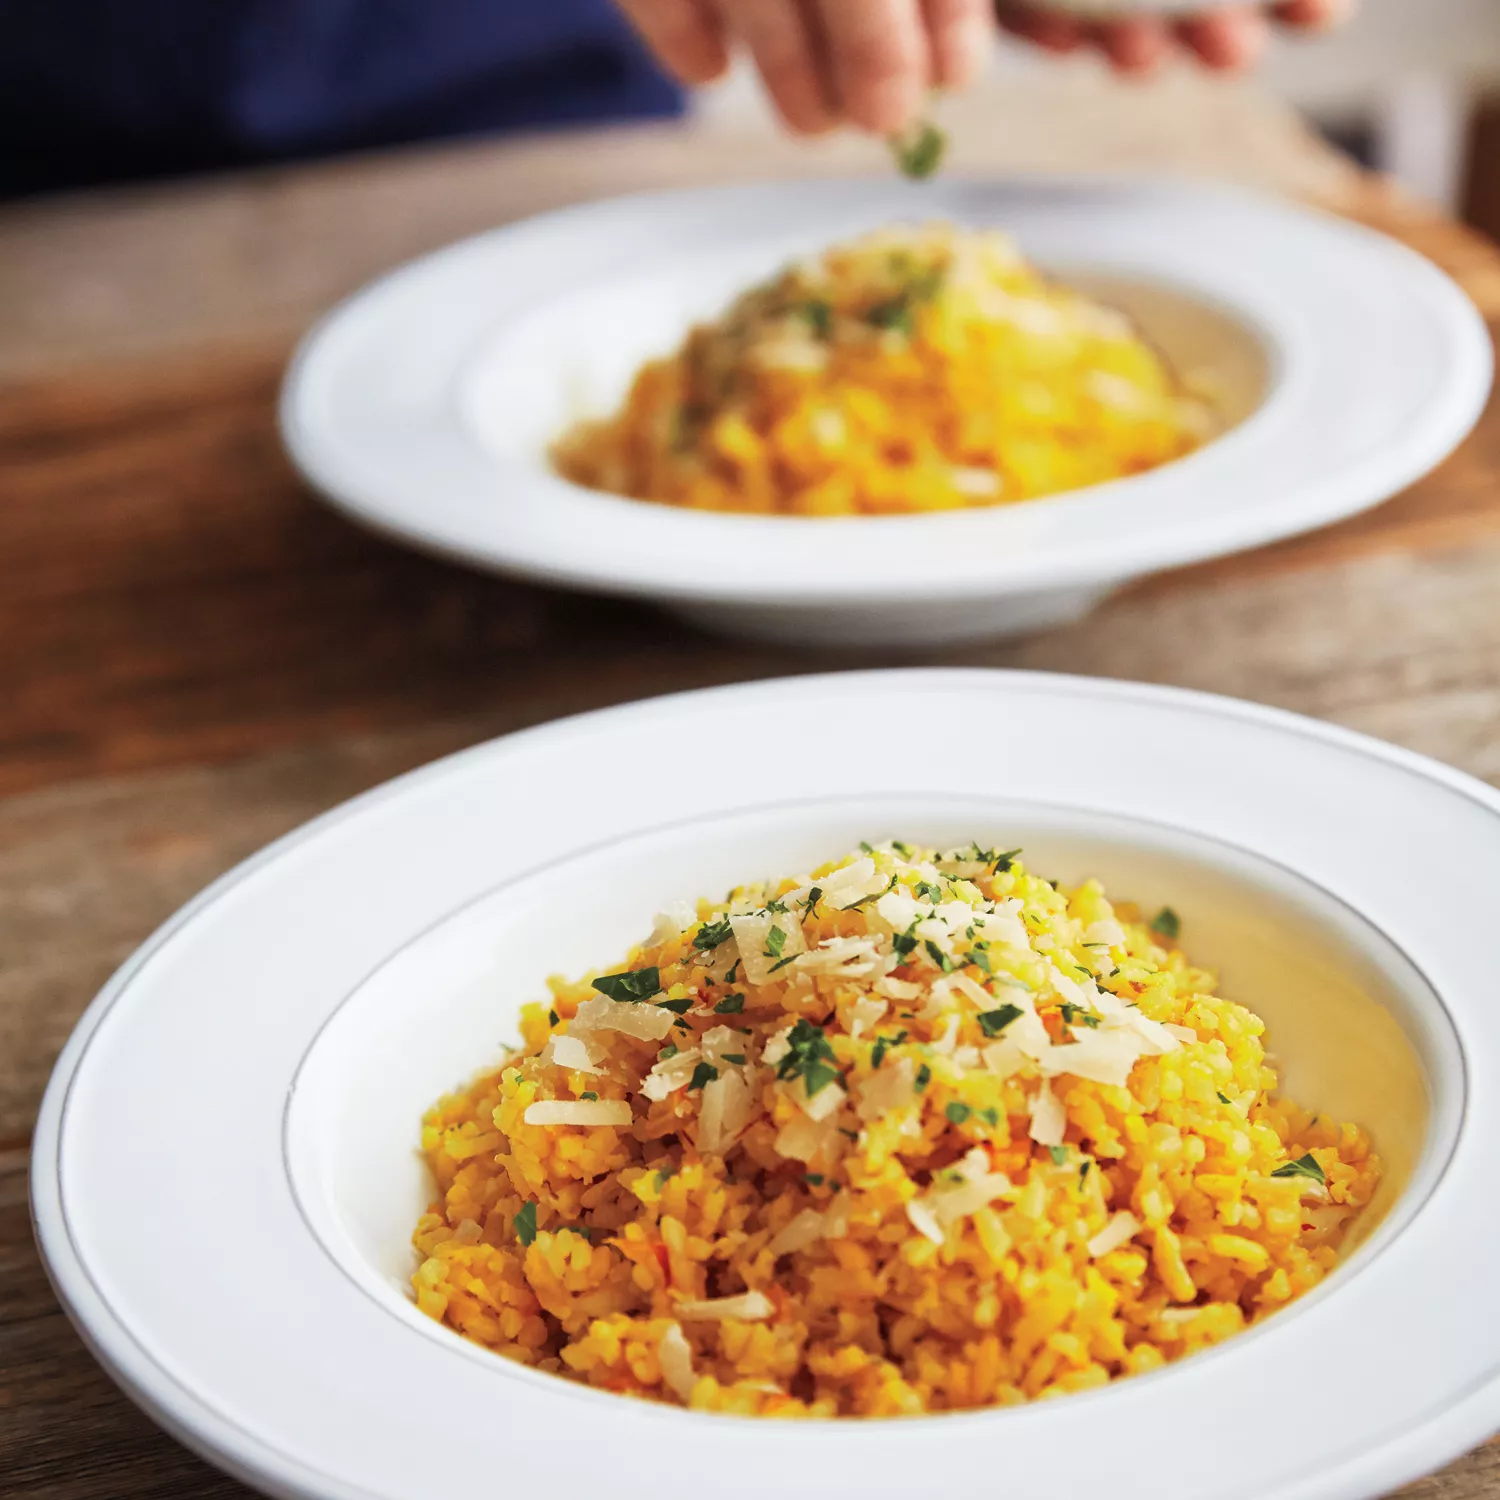 Breville Rice, Risotto and Pasta Cooker Recipes 